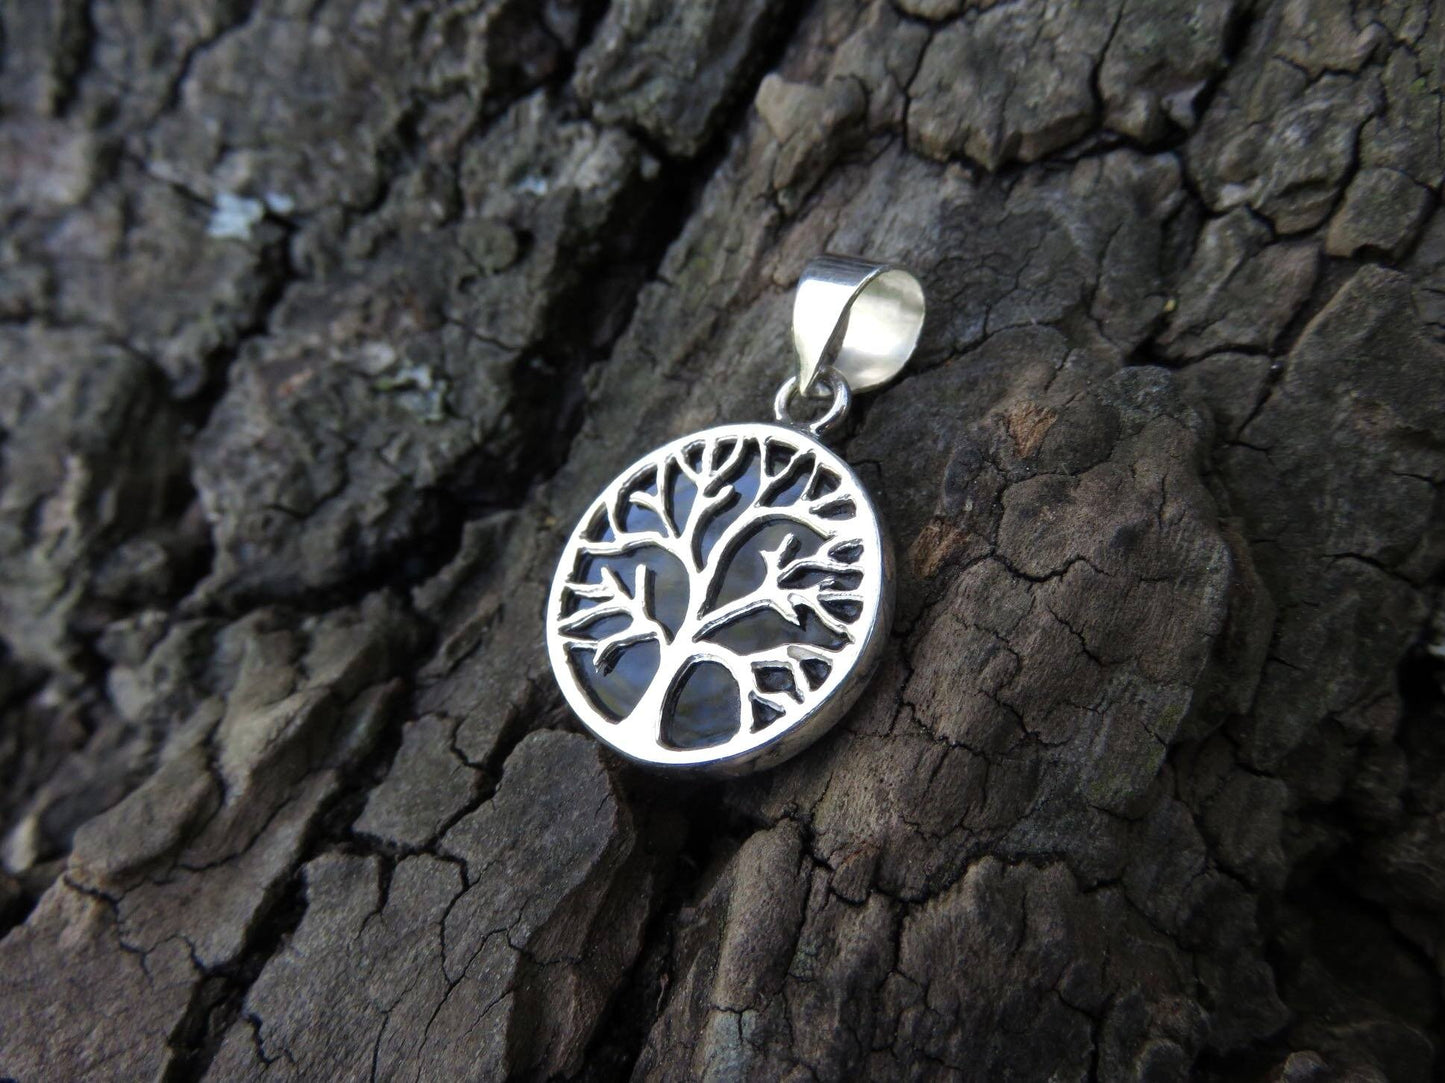 Reversible pendant with the motif of the tree of life made of silver